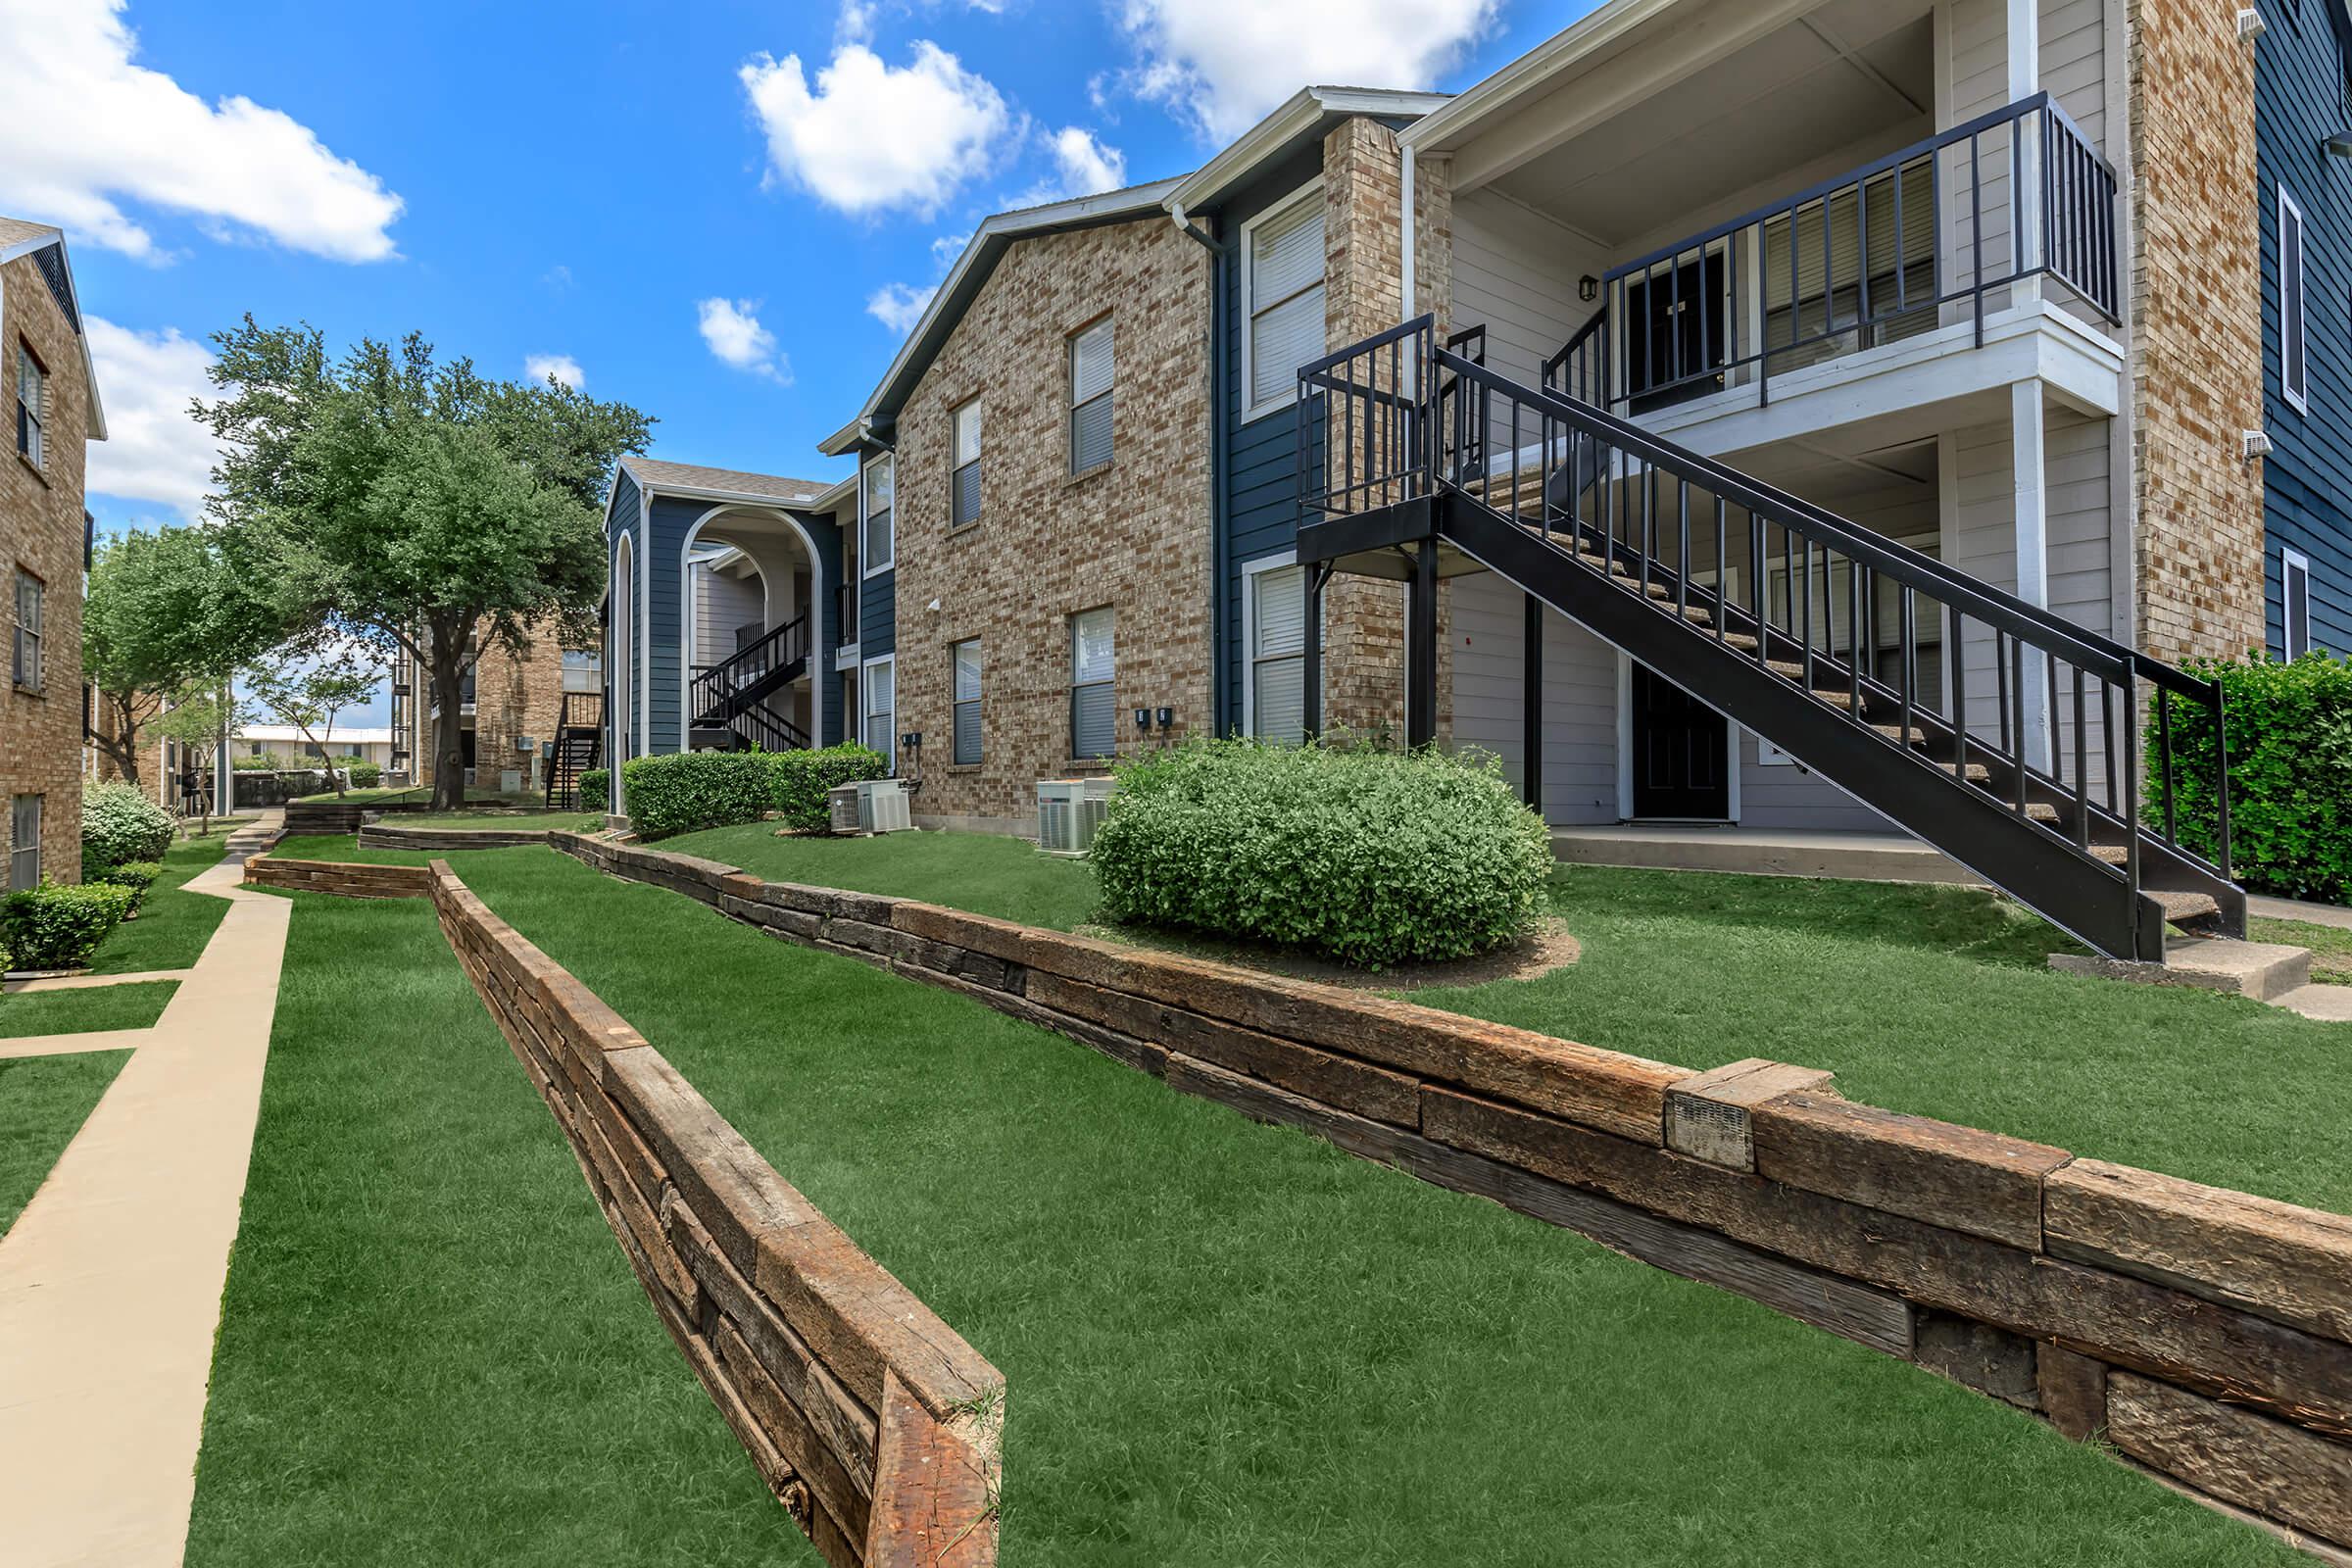 APARTMENTS FOR RENT IN DALLAS, TX